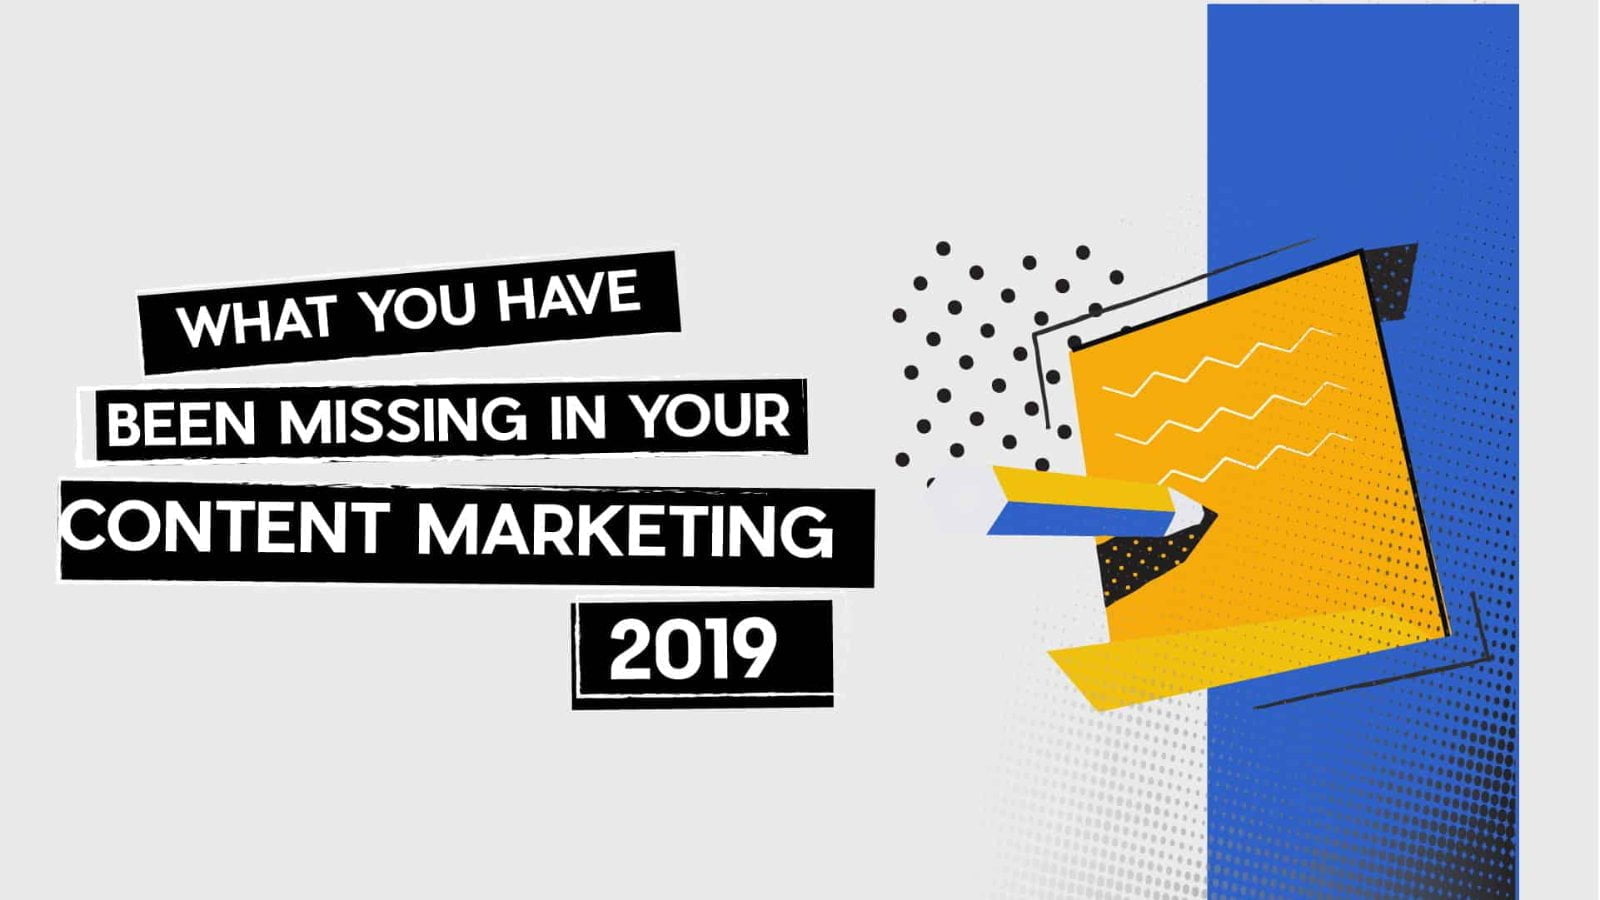 What you have been missing in your content marketing 2019